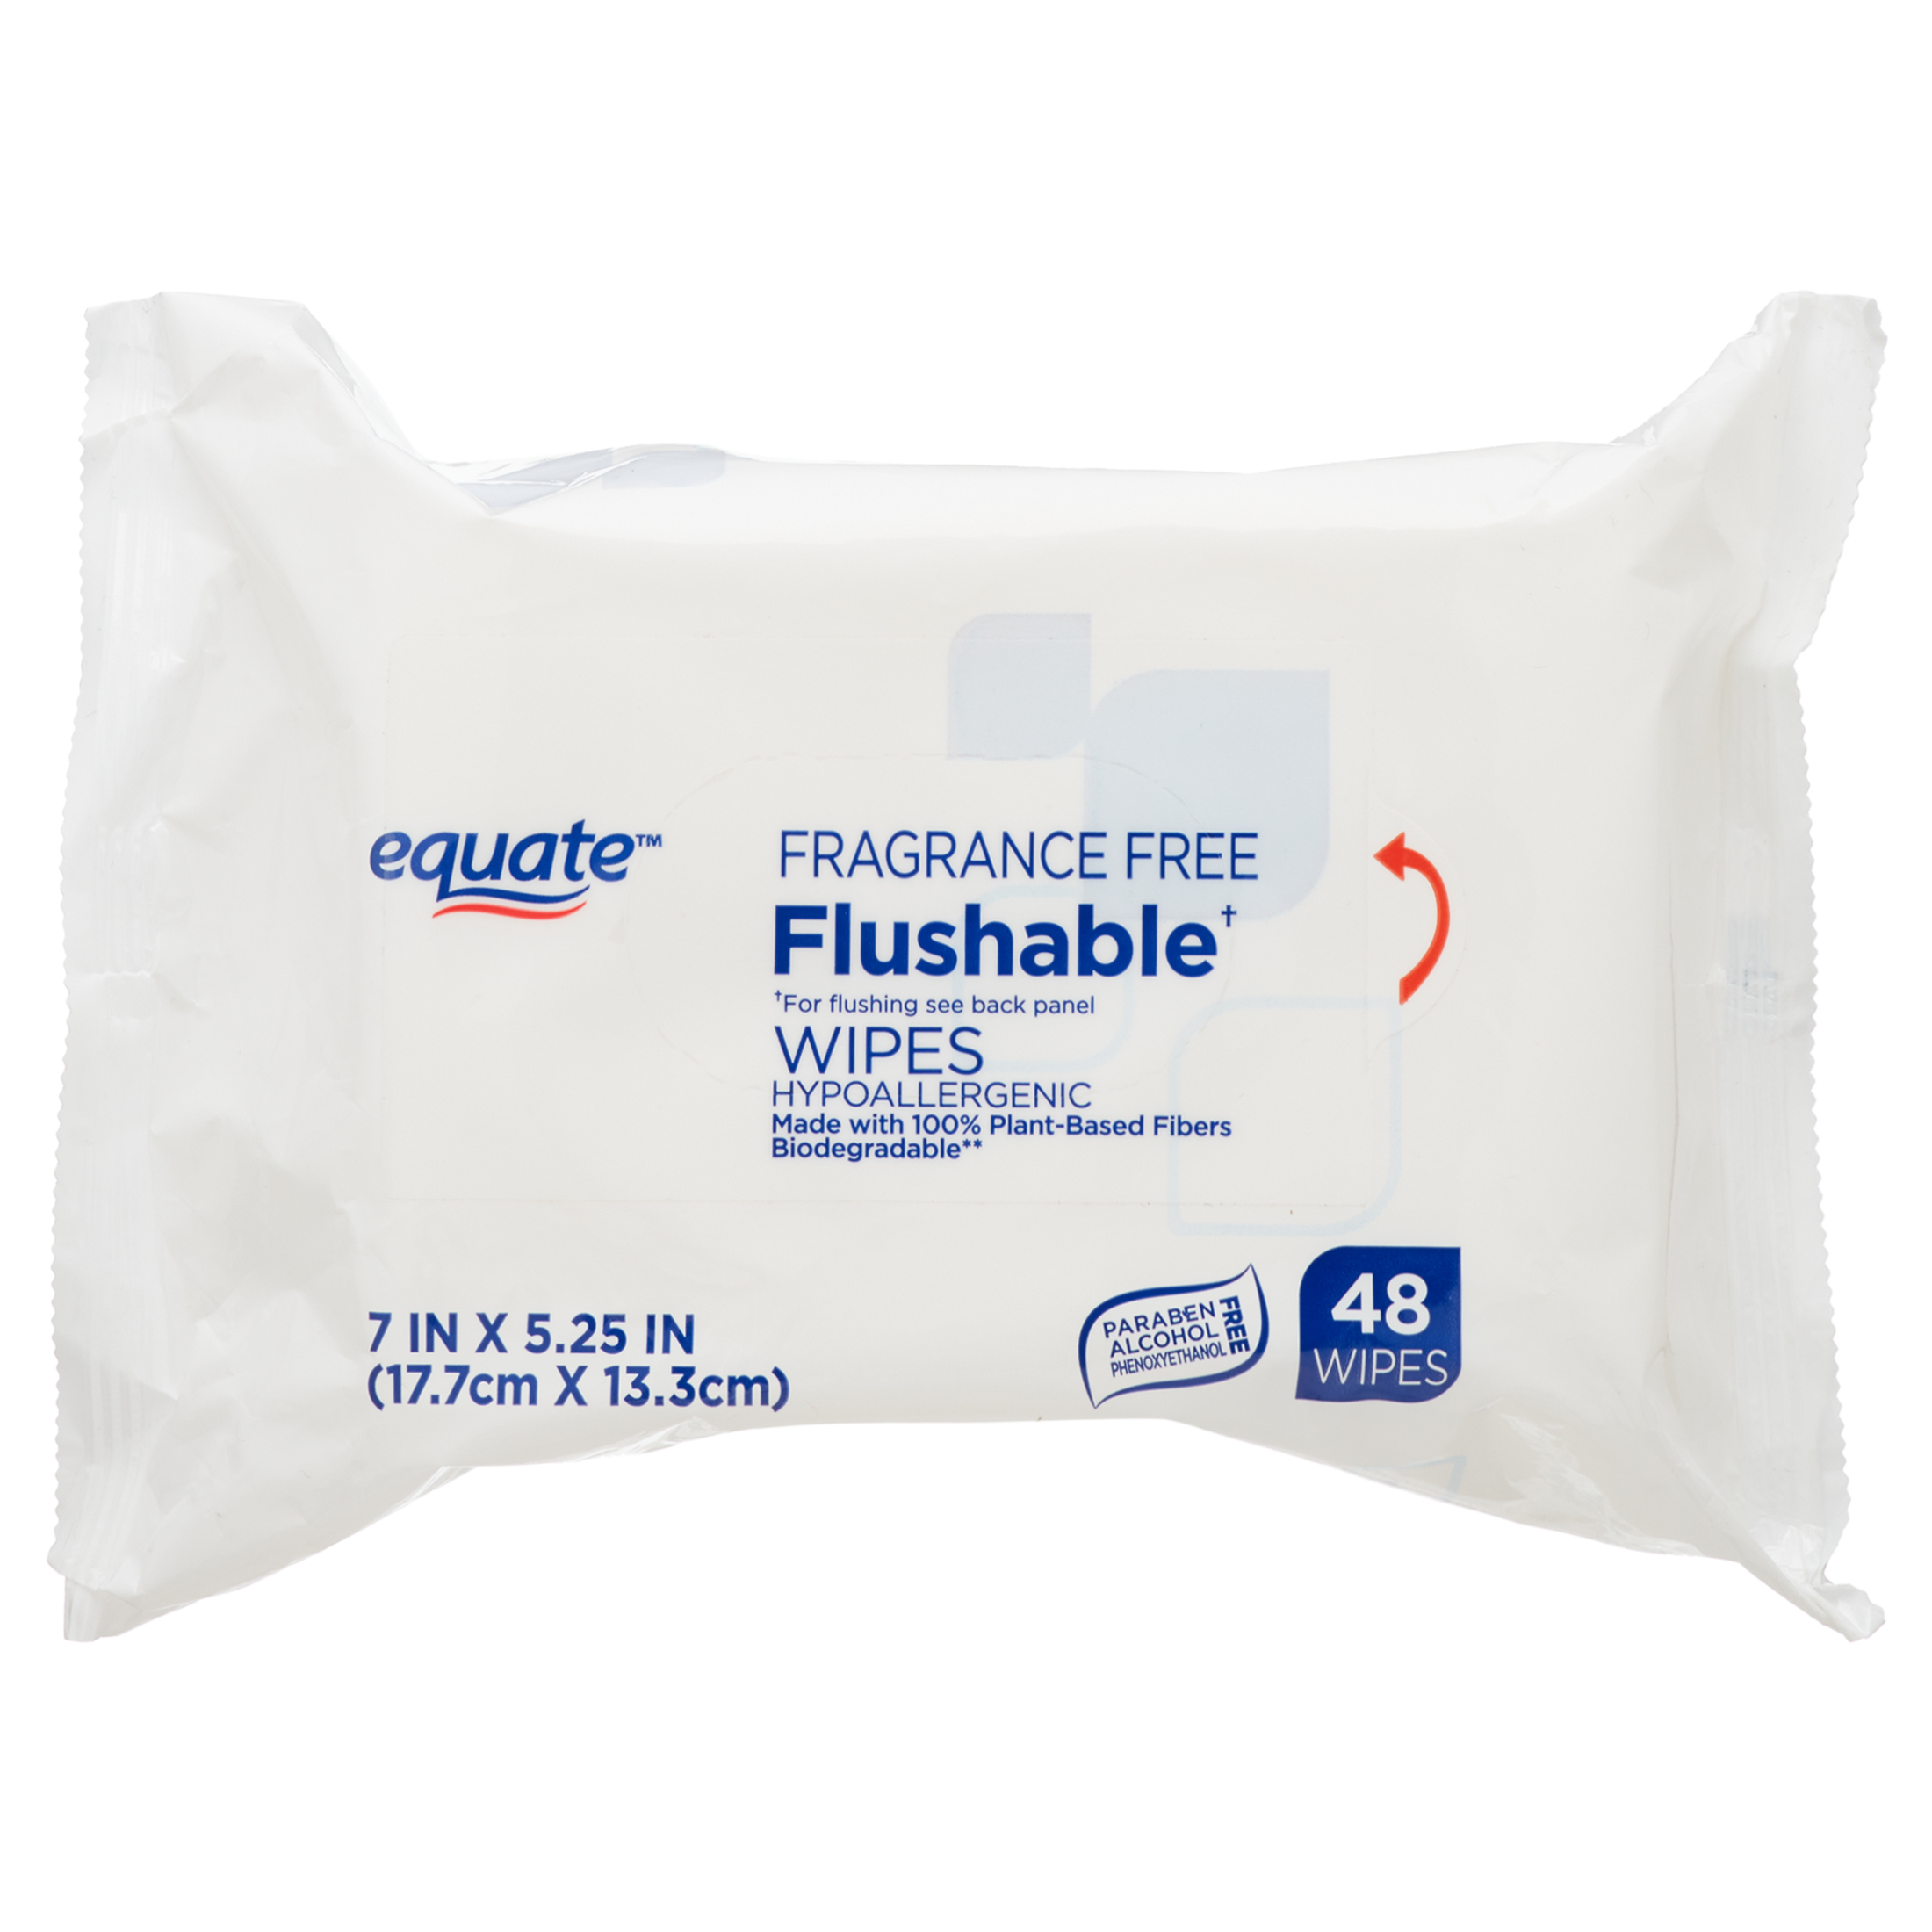 Equate Fragrance Free Flushable Wipes, 3 Resealable Packs (144 Total Wipes) - image 4 of 9